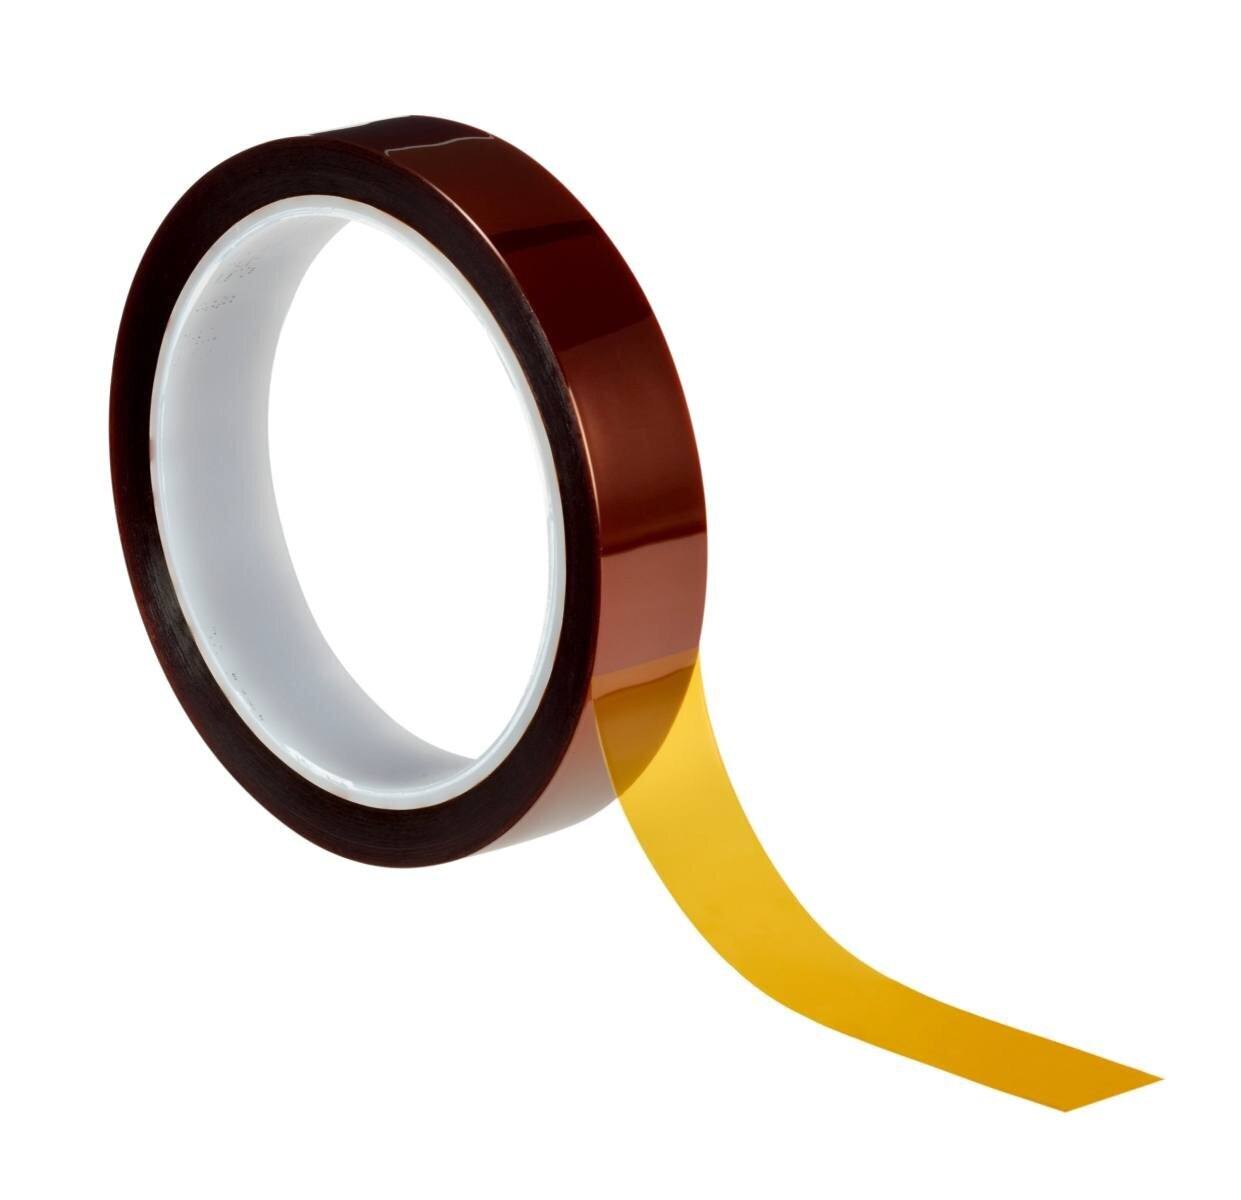 3M high temperature polyimide adhesive tape 5413, brown, 9.5 mm x 33 m, 68.58 µm